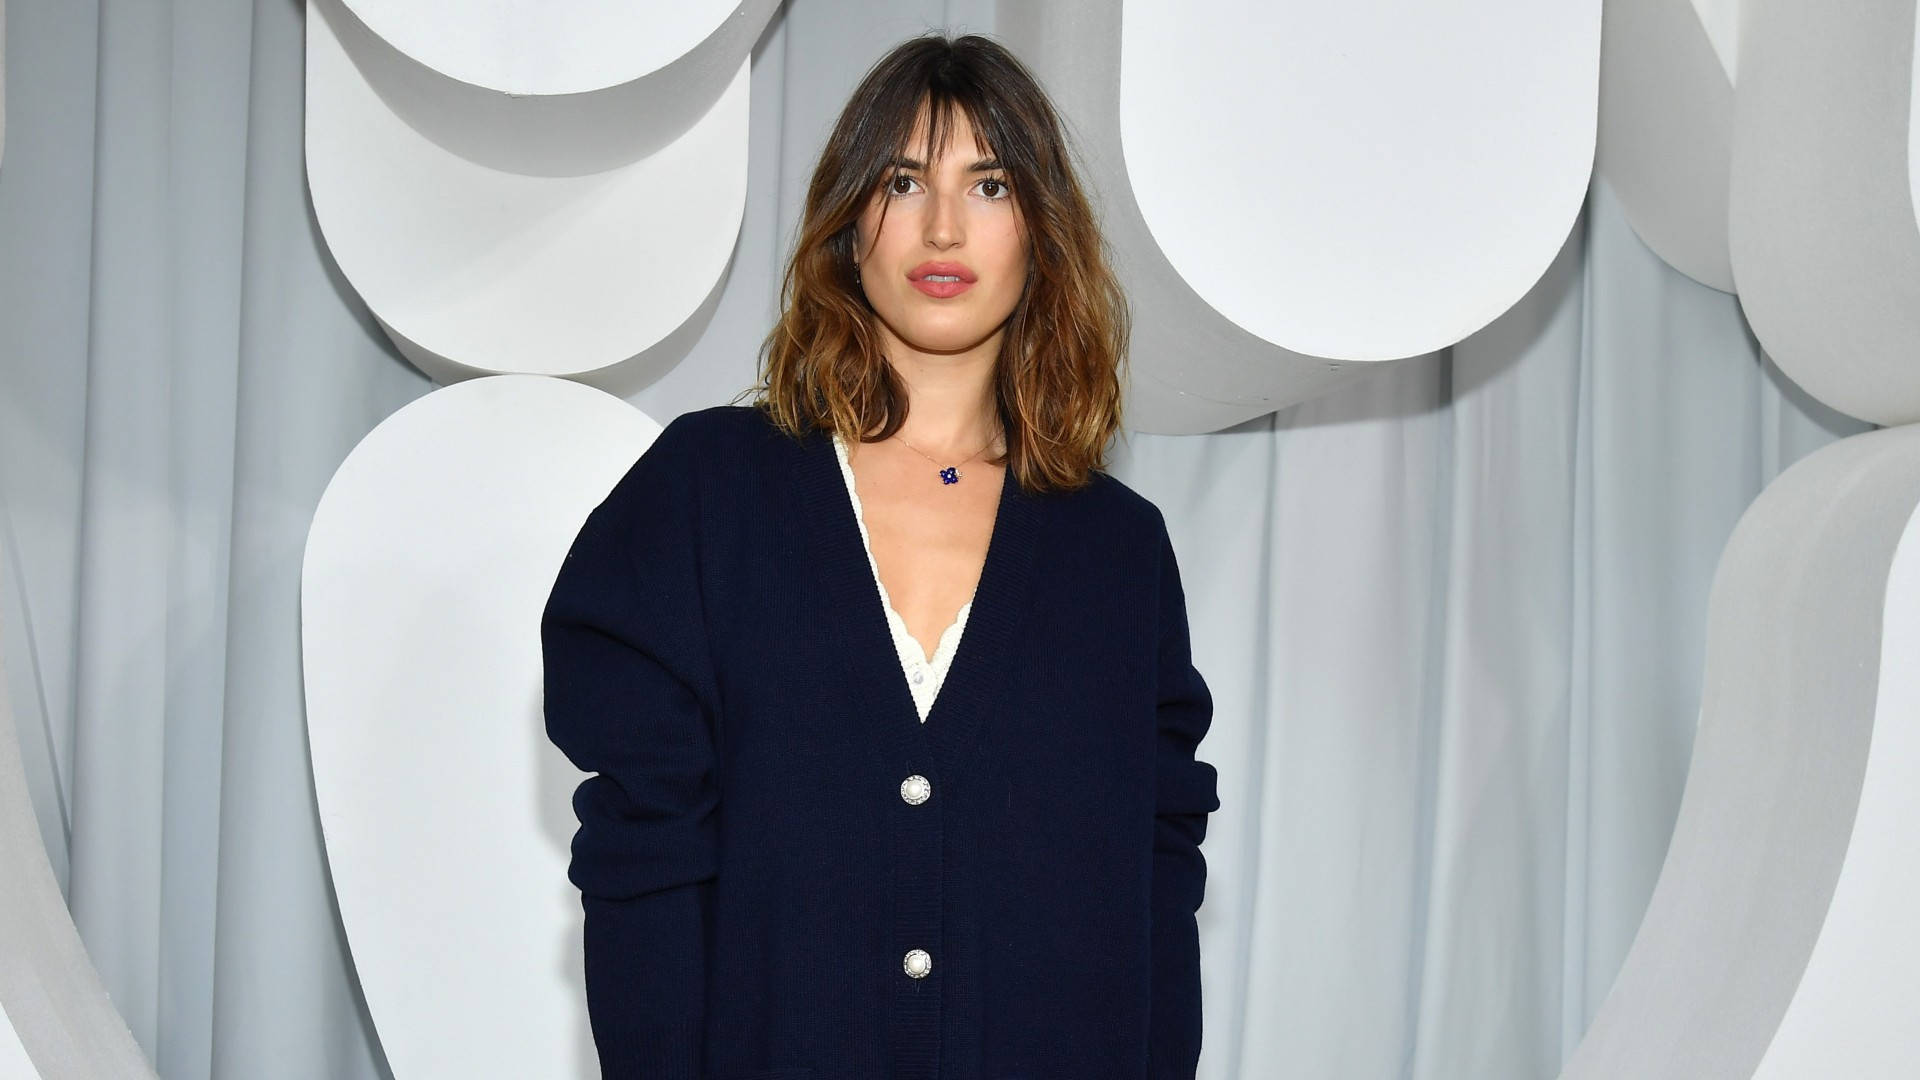 Rouje Founder Jeanne Damas On Her Favorite Beauty Products